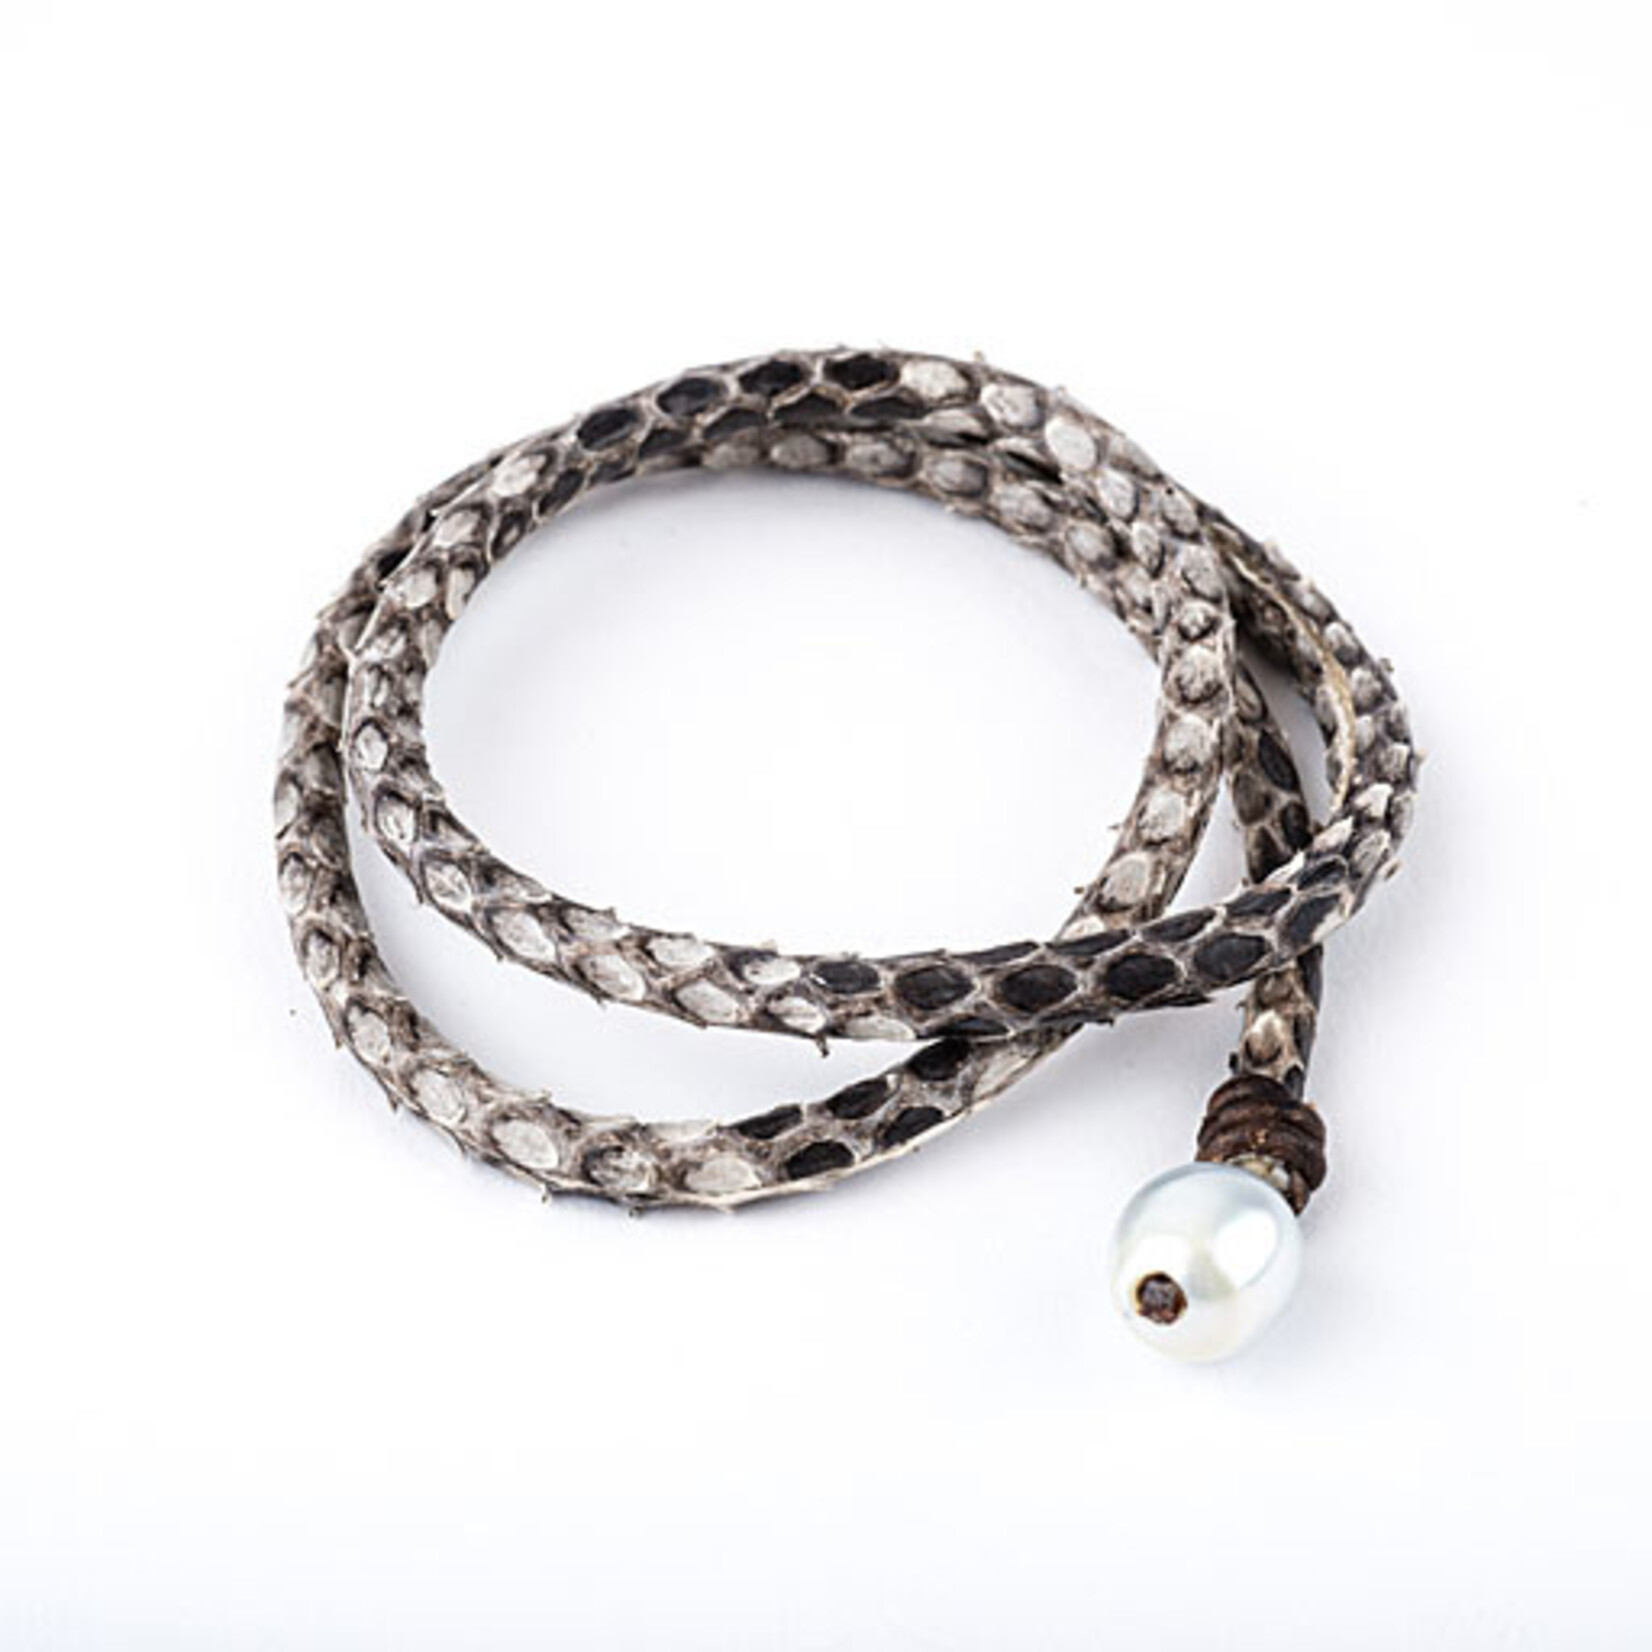 Mina Danielle Snakeskin Leather Wrap with Pearl